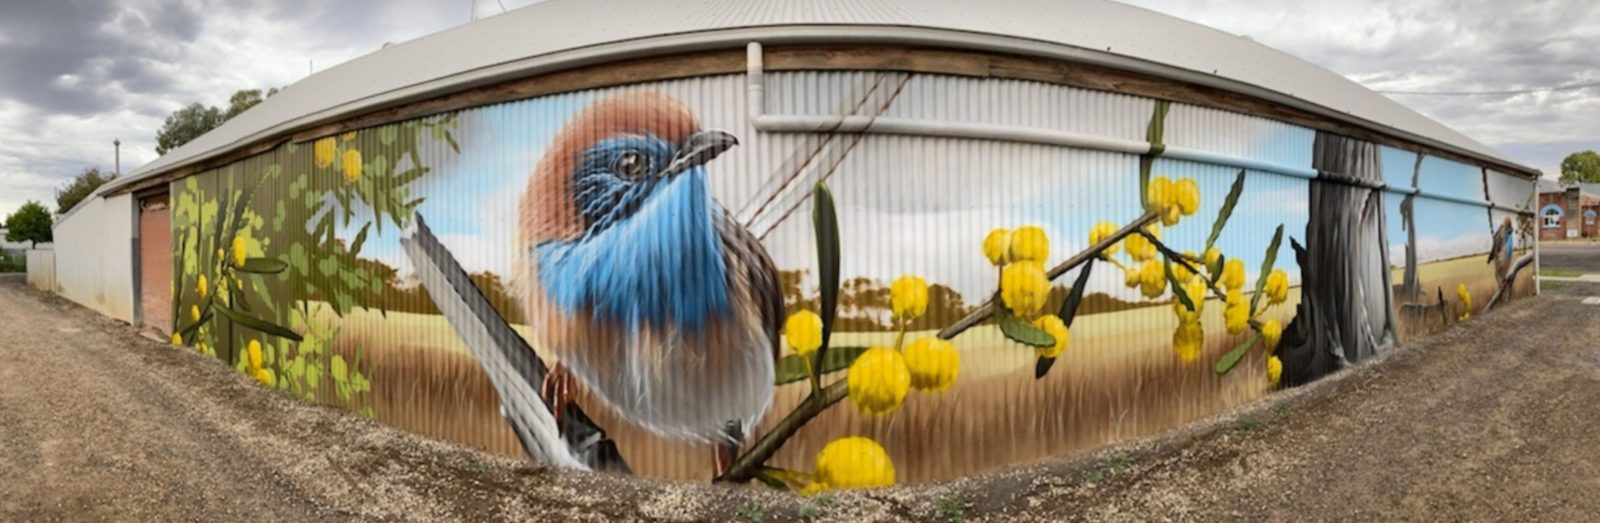 Detail of wren painted on corrugated iron shed wall